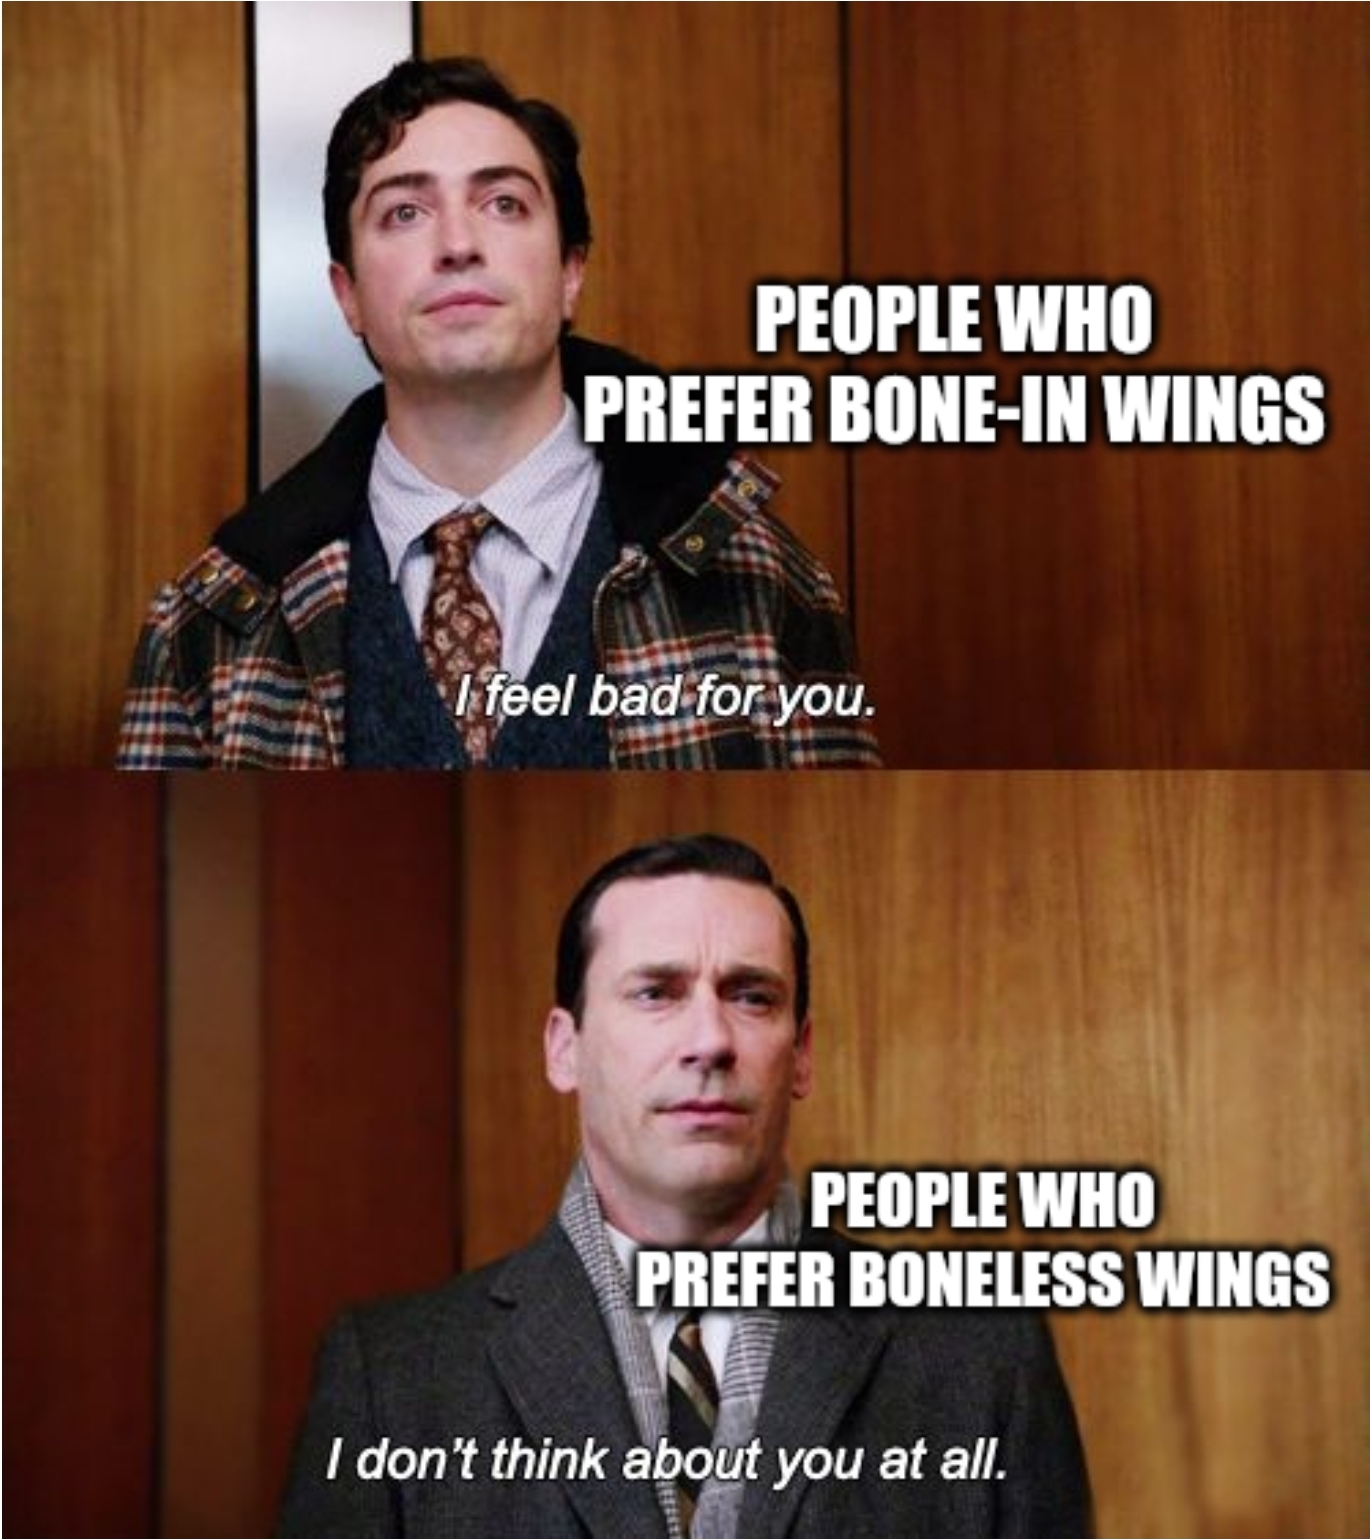 dank memes - photo caption - People Who Prefer BoneIn Wings yaf I feel bad for you. People Who Prefer Boneless Wings I don't think about you at all.